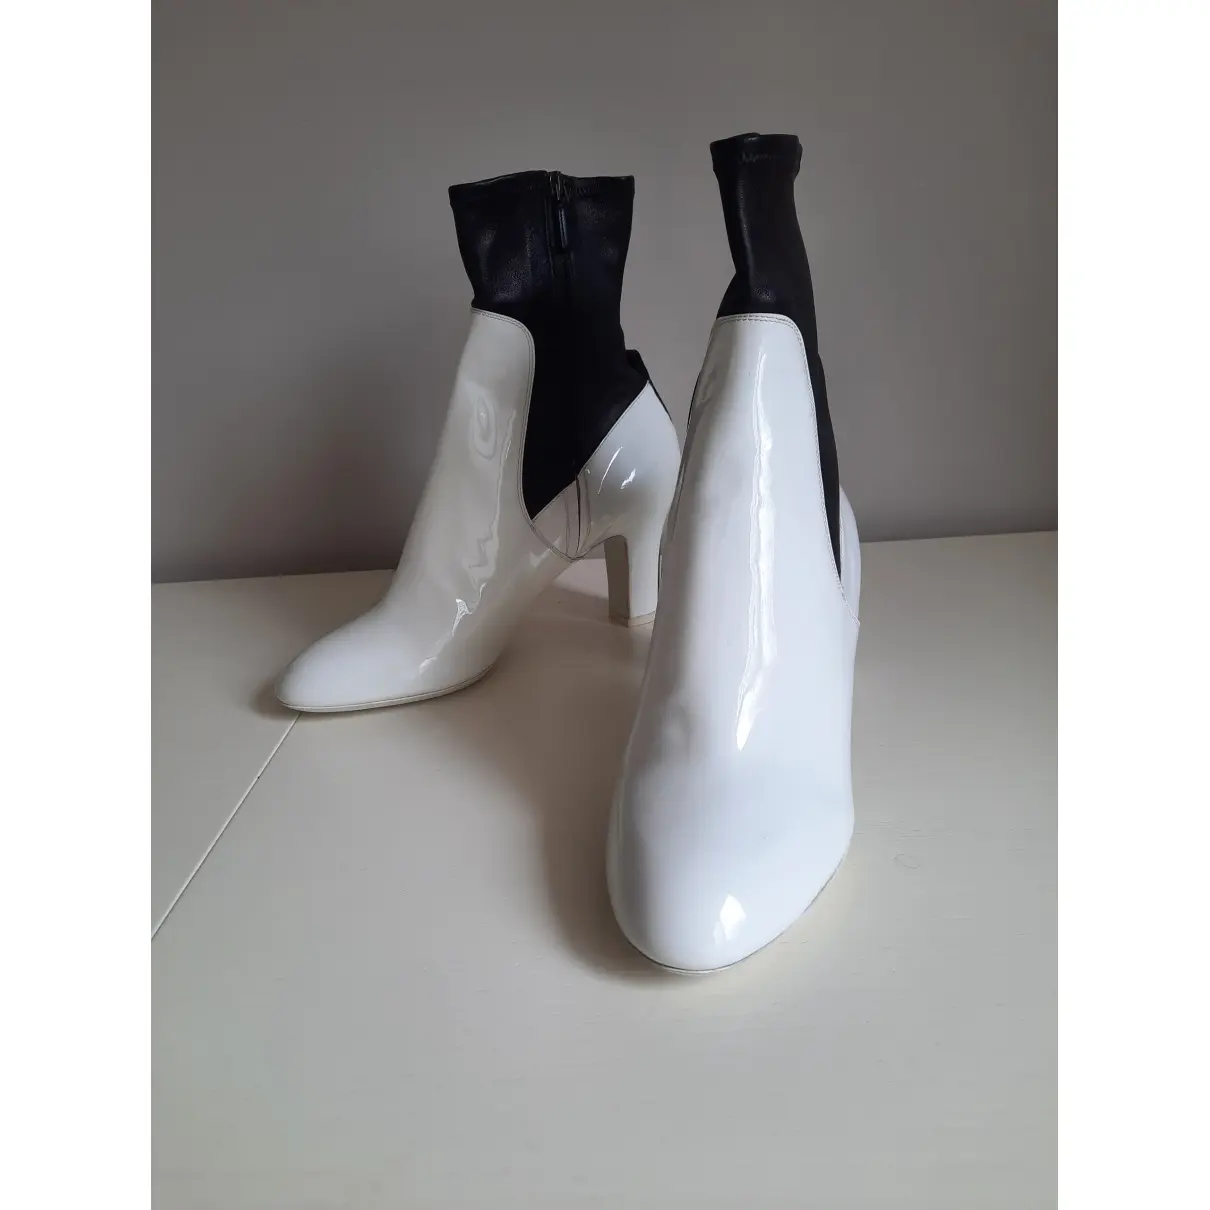 Buy Louis Vuitton Patent leather ankle boots online